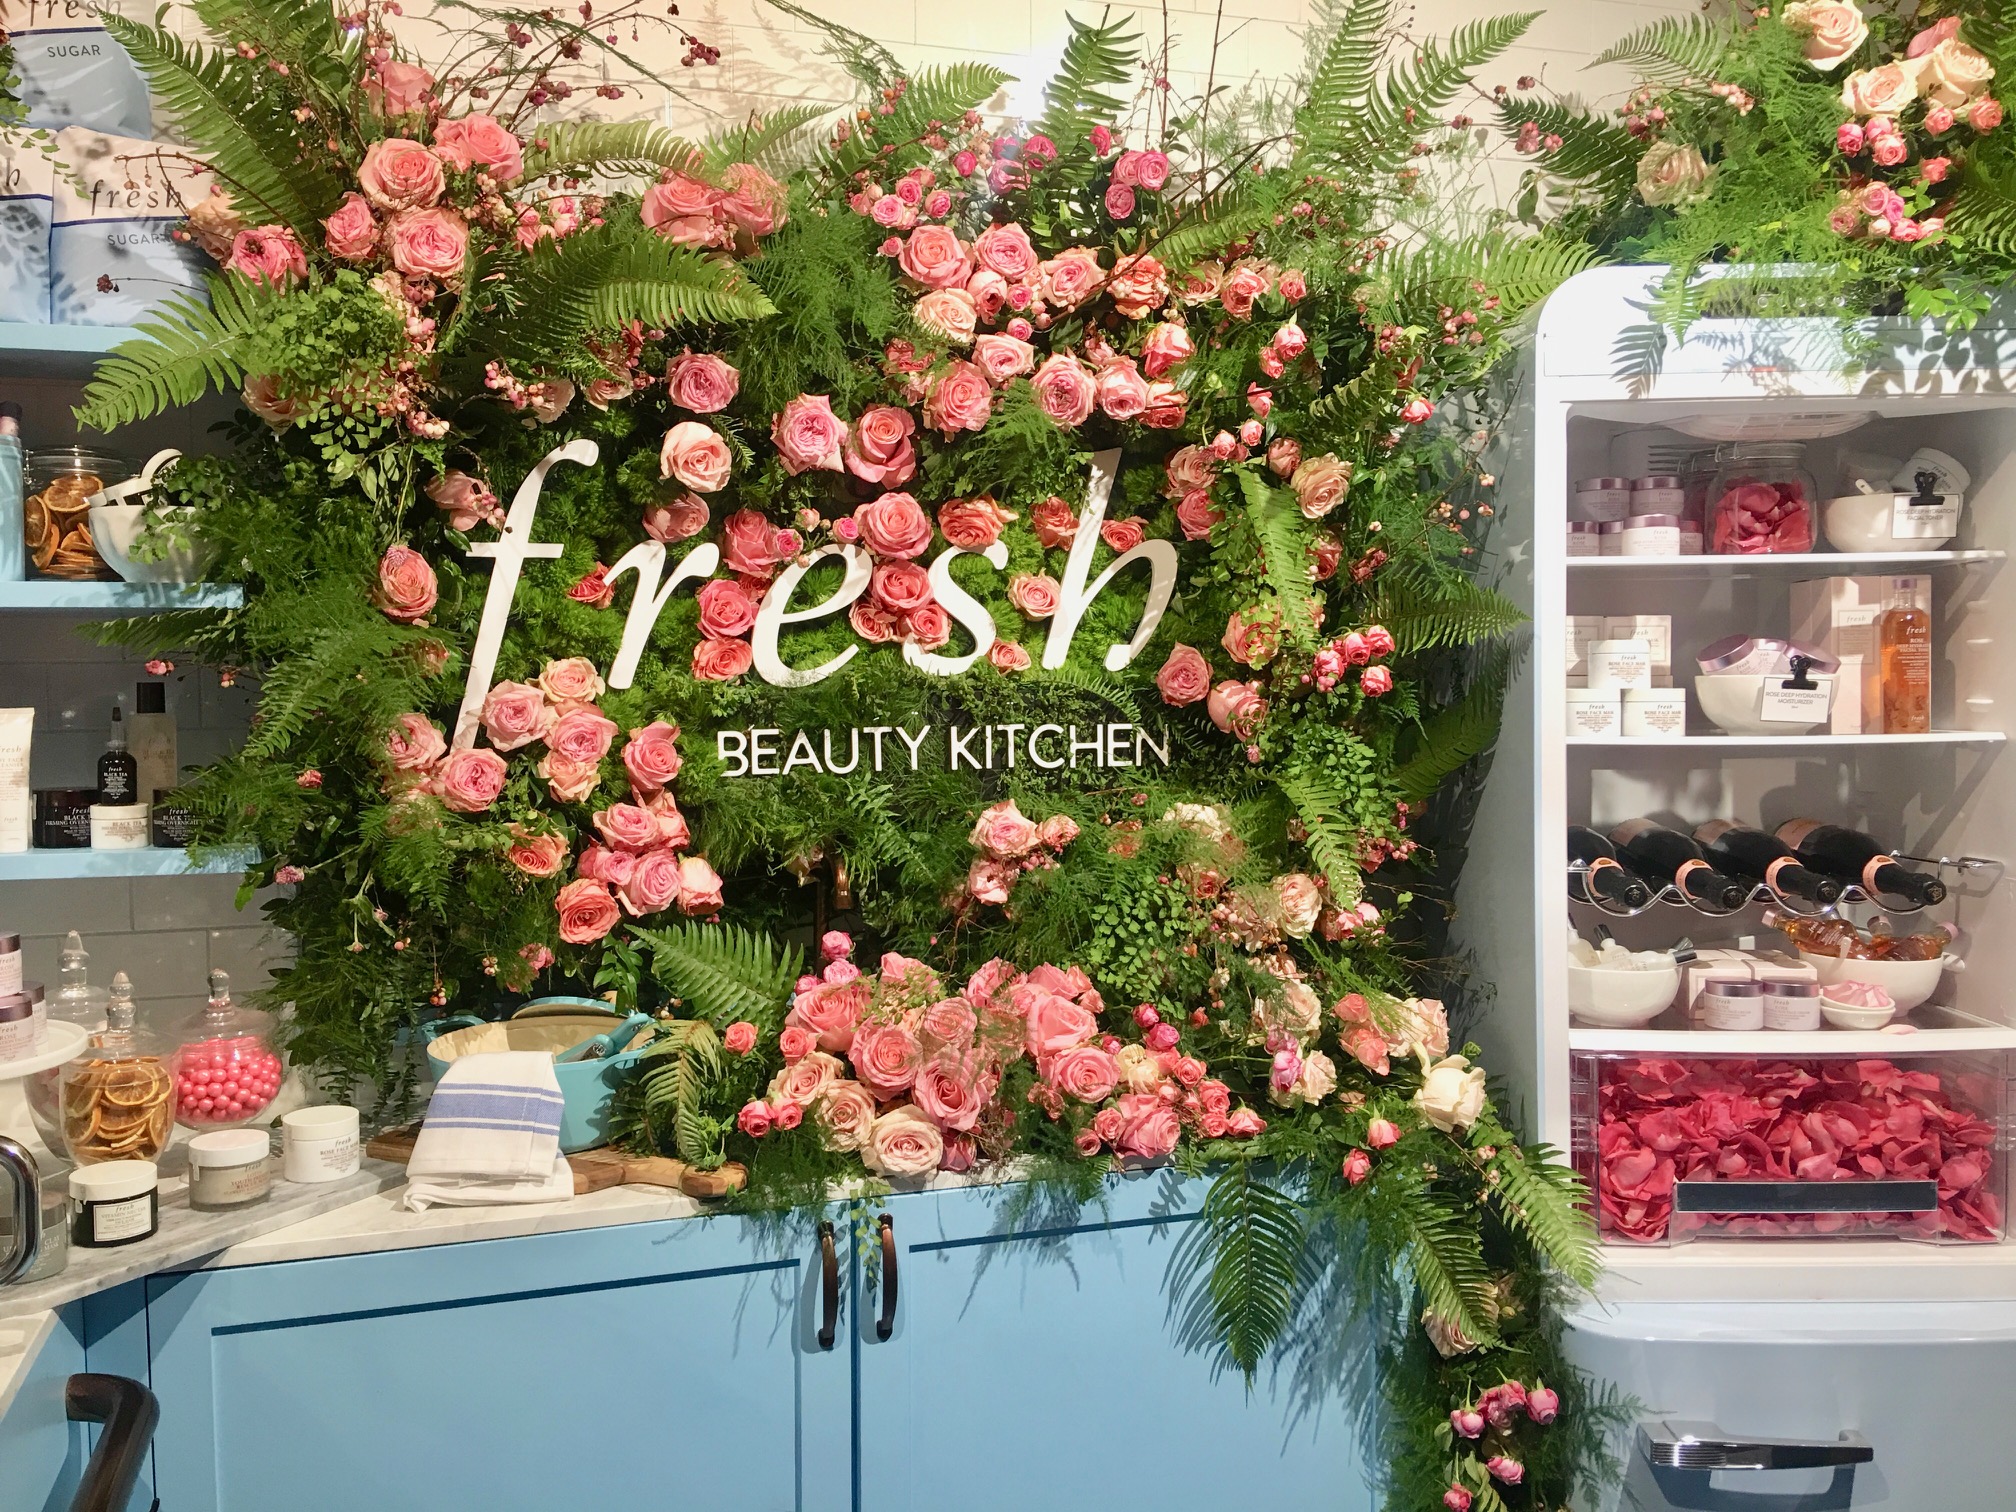 Sephoria House of Beauty Event: The perfect kitchen by Fresh